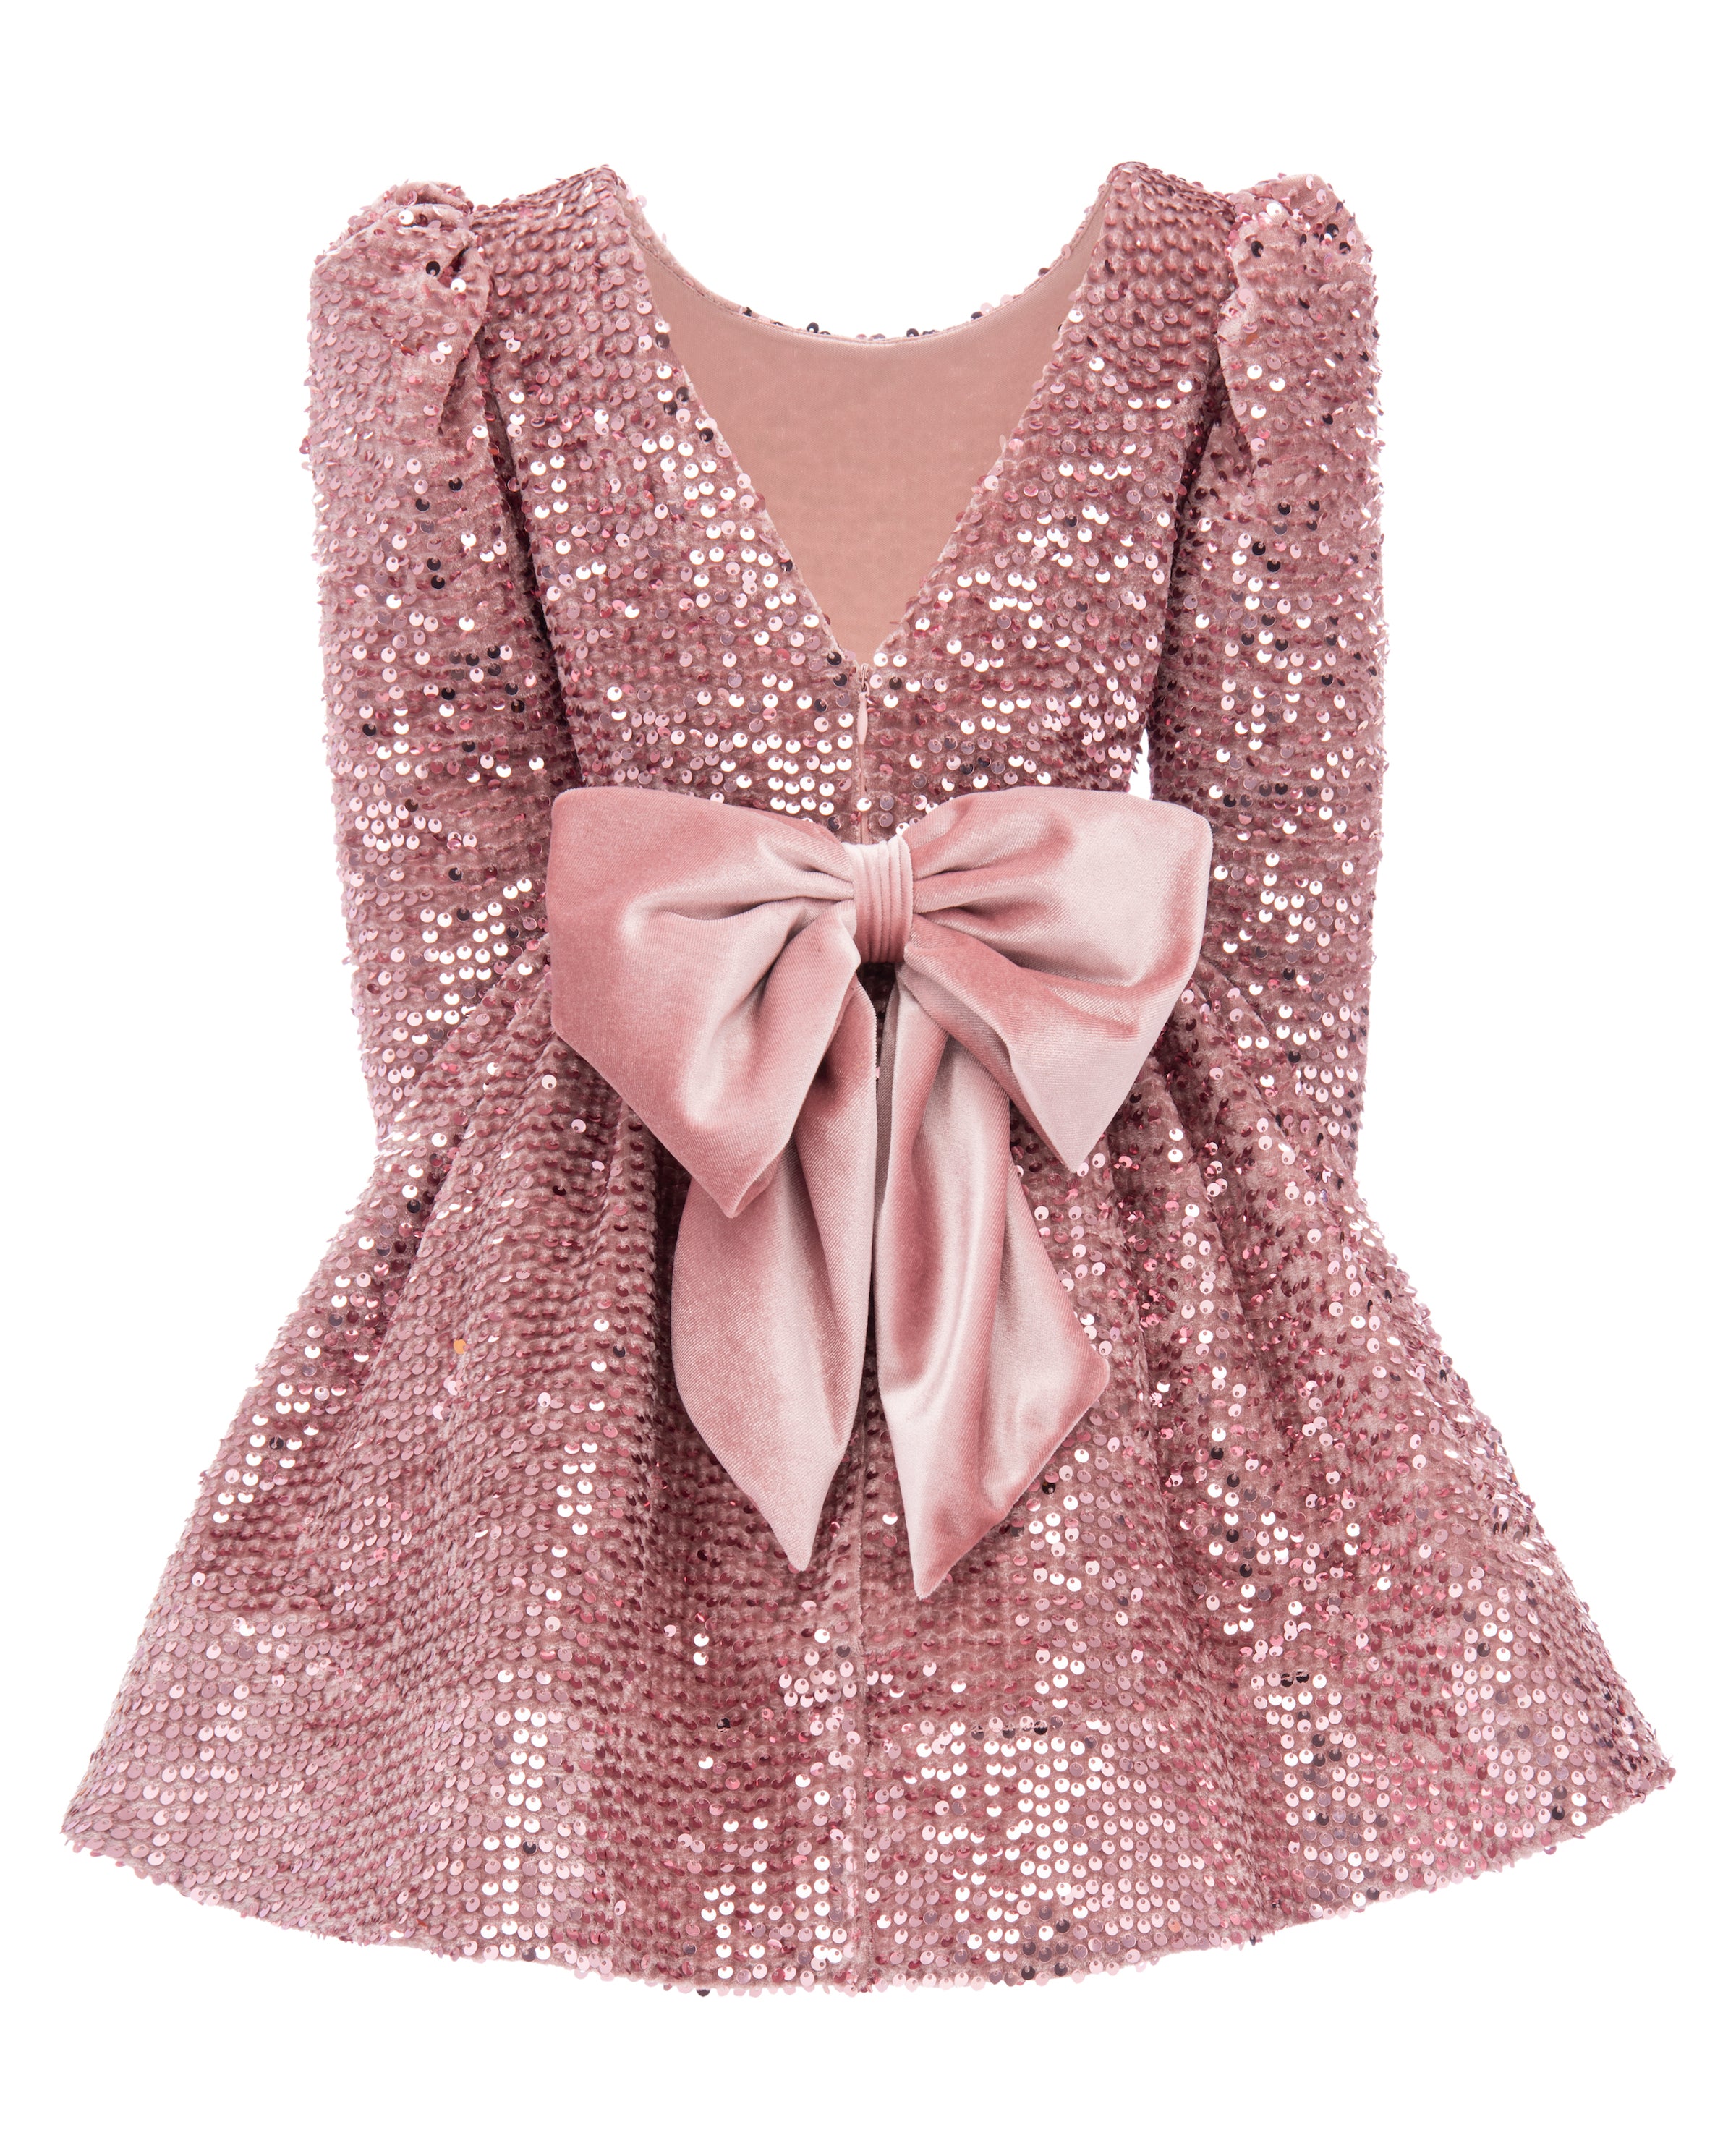 Dress My Crafts Sequins 25gms - Pink Story